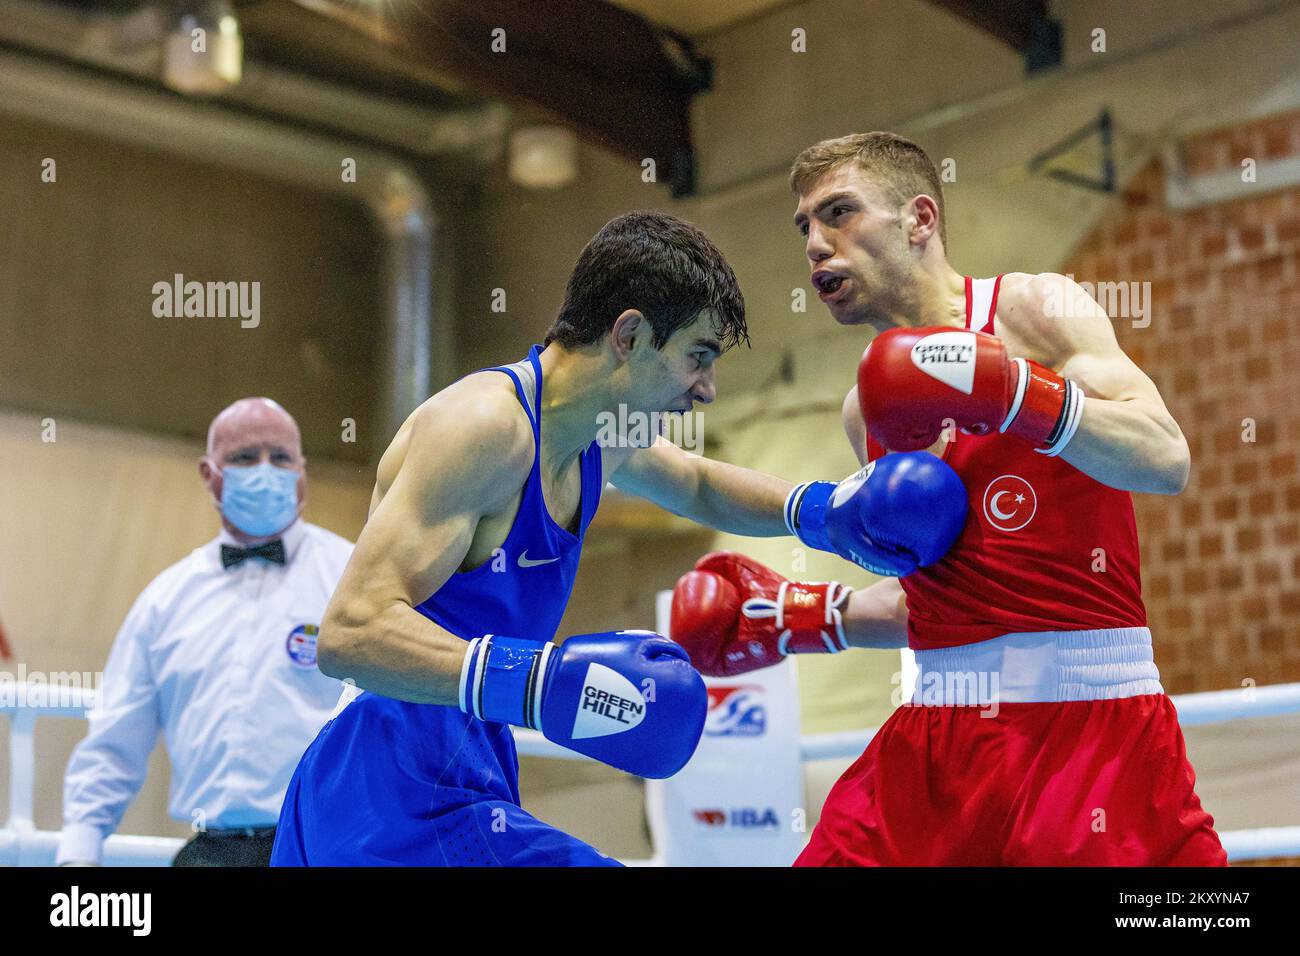 Mehmet Aydemir of Turkey (red) fights Harut Hakobkokhyan of Armenia (blue) during the EUBC U22 European Boxing Championships Welterweight (63.5-67kg) match at Intersport Hall on March 15, 2022 in Porec, Croatia. Photo: Srecko Niketic/PIXSELL Stock Photo